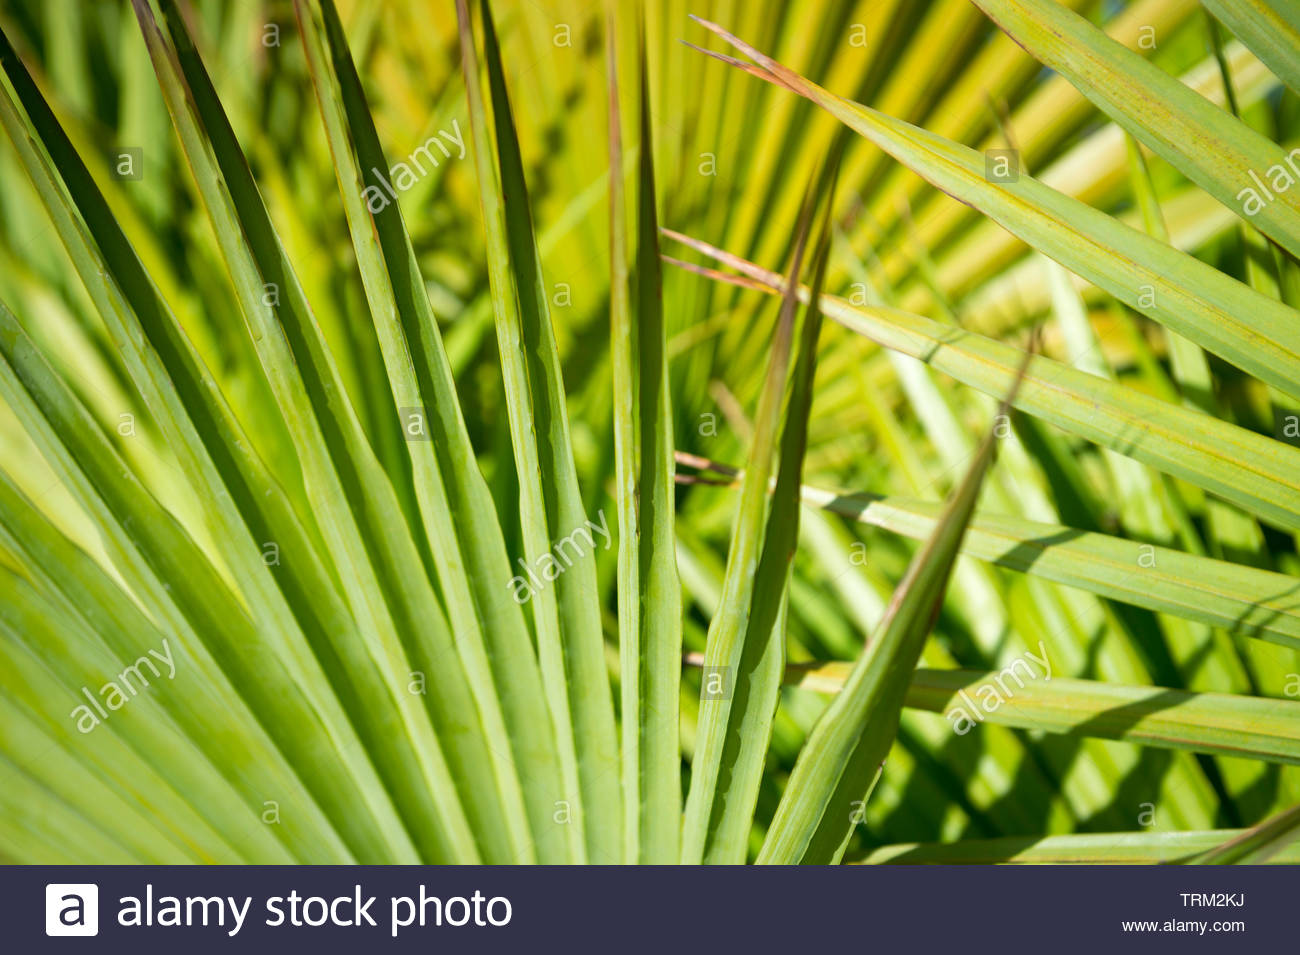 Bright Natural Background Of Green Saw Palmetto Fan Palm Fronds In